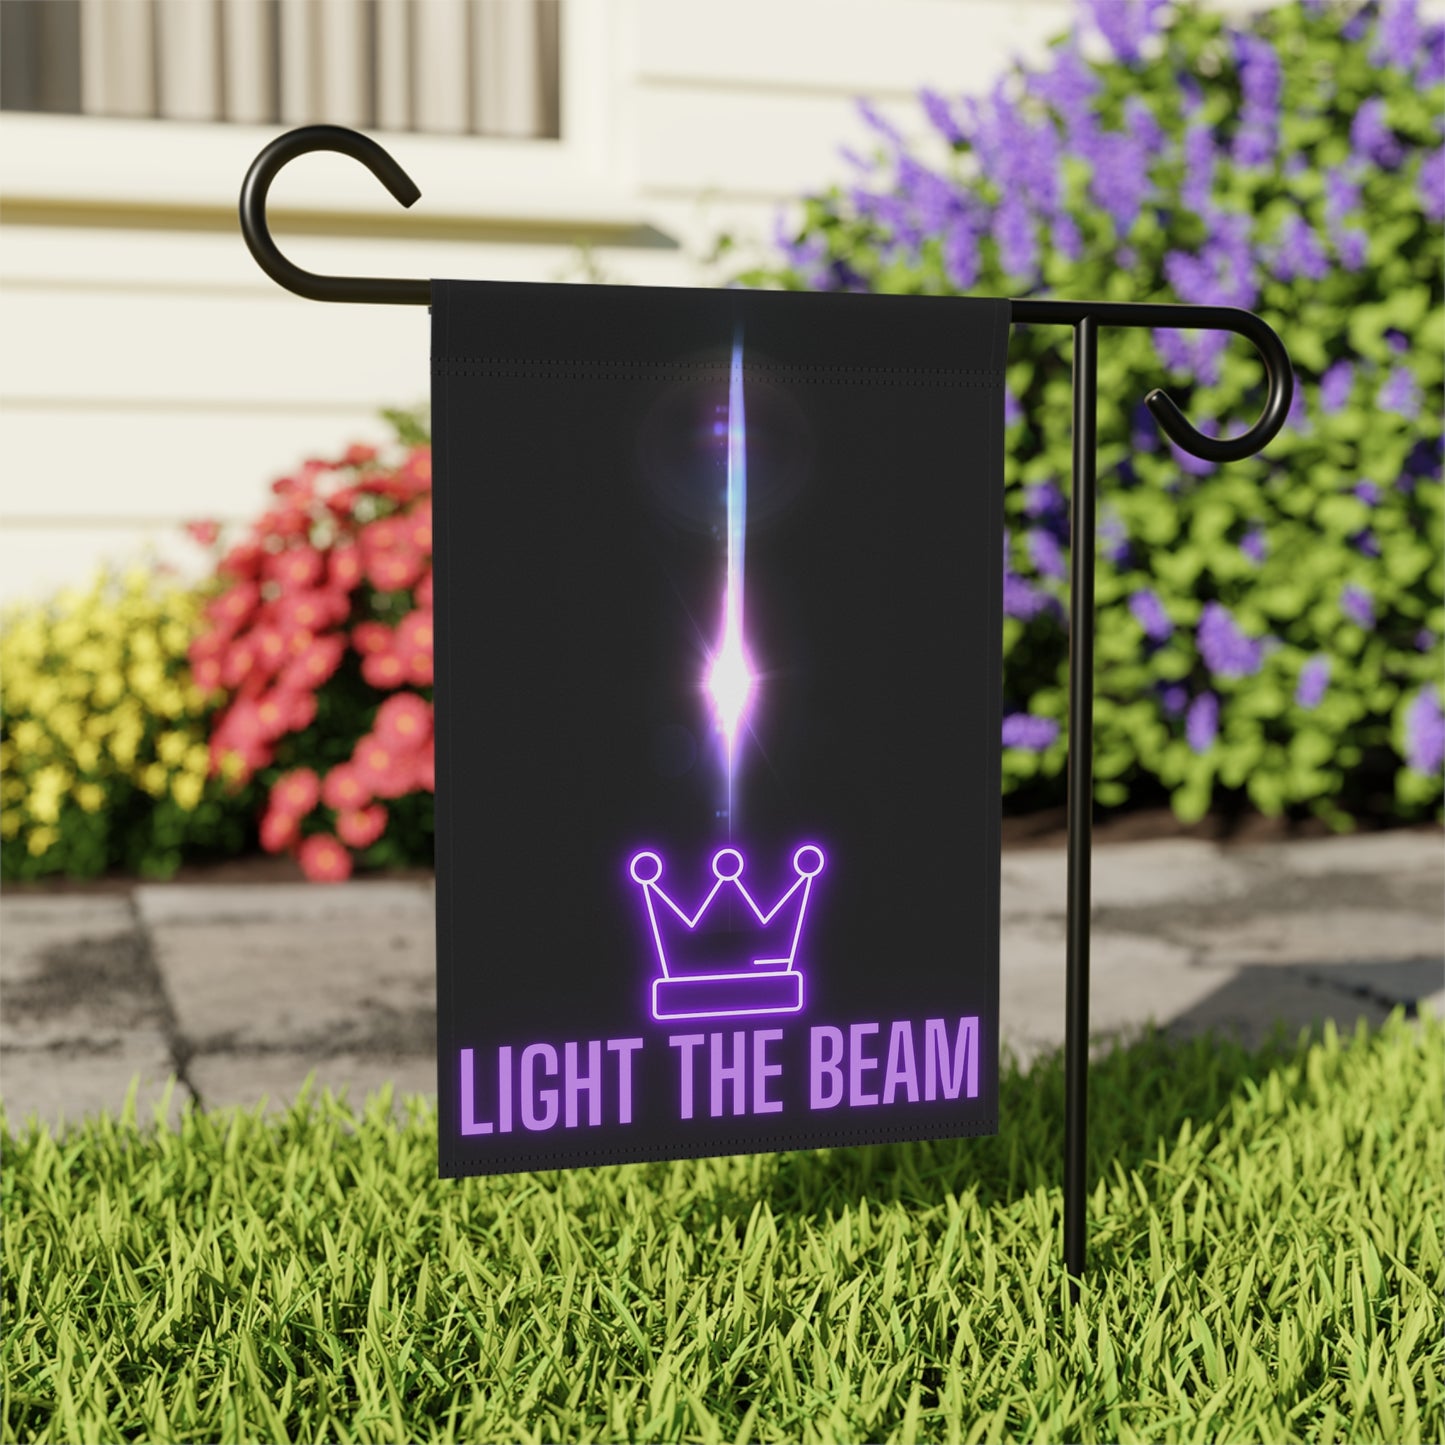 Kings Basketball Light the Beam Banner Yard Flag, Sacramento Basketball Fan House Flag, Kings Fan Gift, Sac Town Beam Team, Light the Beam! Celebrate another W - win - for your Kings Basketball team with a Light the Beam banner yard flag. Perfect to fly on game and the day after another W. Listing is for flag only, pole not included. It's going to be an epic season for our Sacramento Basketball team - show off your Sac-Town pride